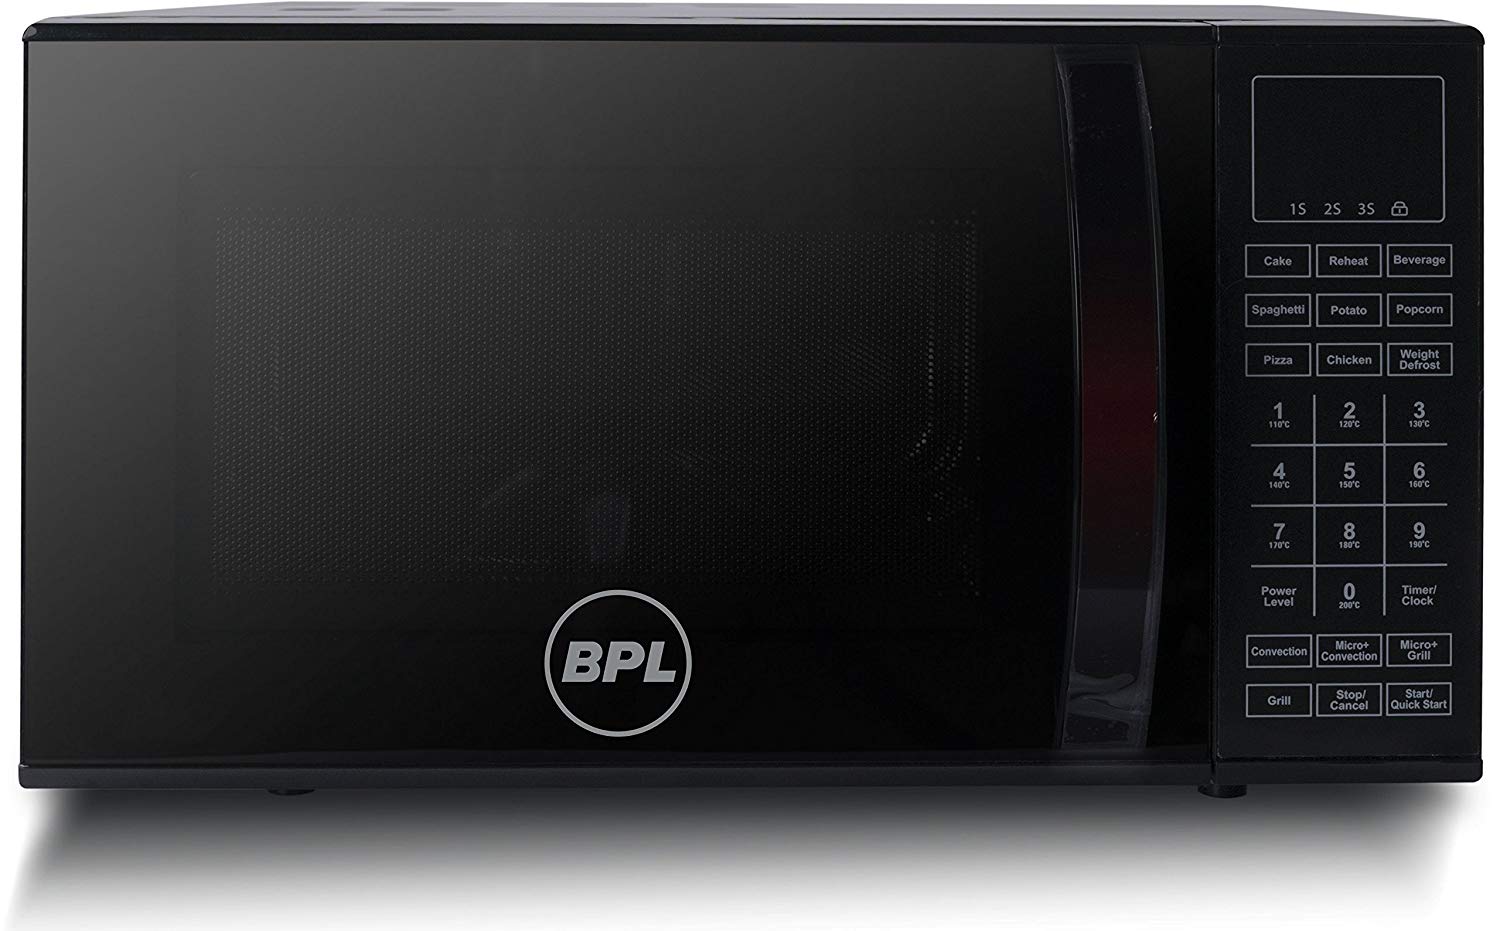 Gadget Review: Top 10 Best Convection Microwave Oven In India 2018 with